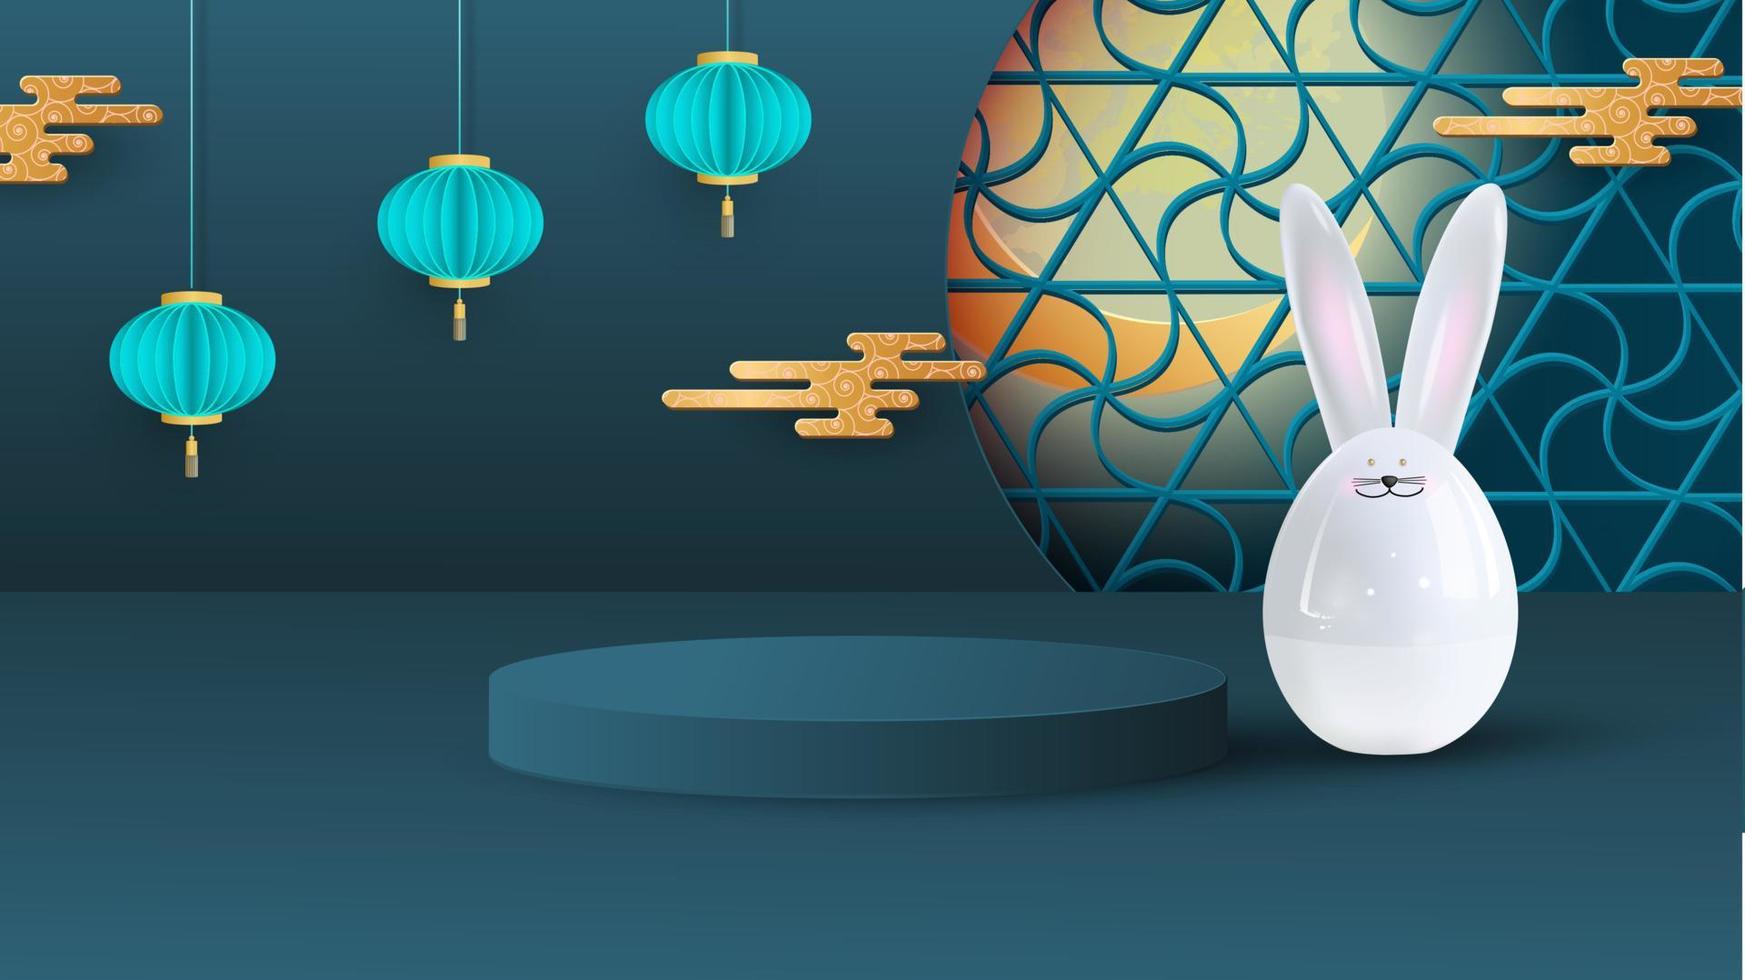 Platform and podium for presentations. Festive background for the Mid-Autumn Festival with a ceramic hare, hanging lanterns and a bright moon. Vector illustration